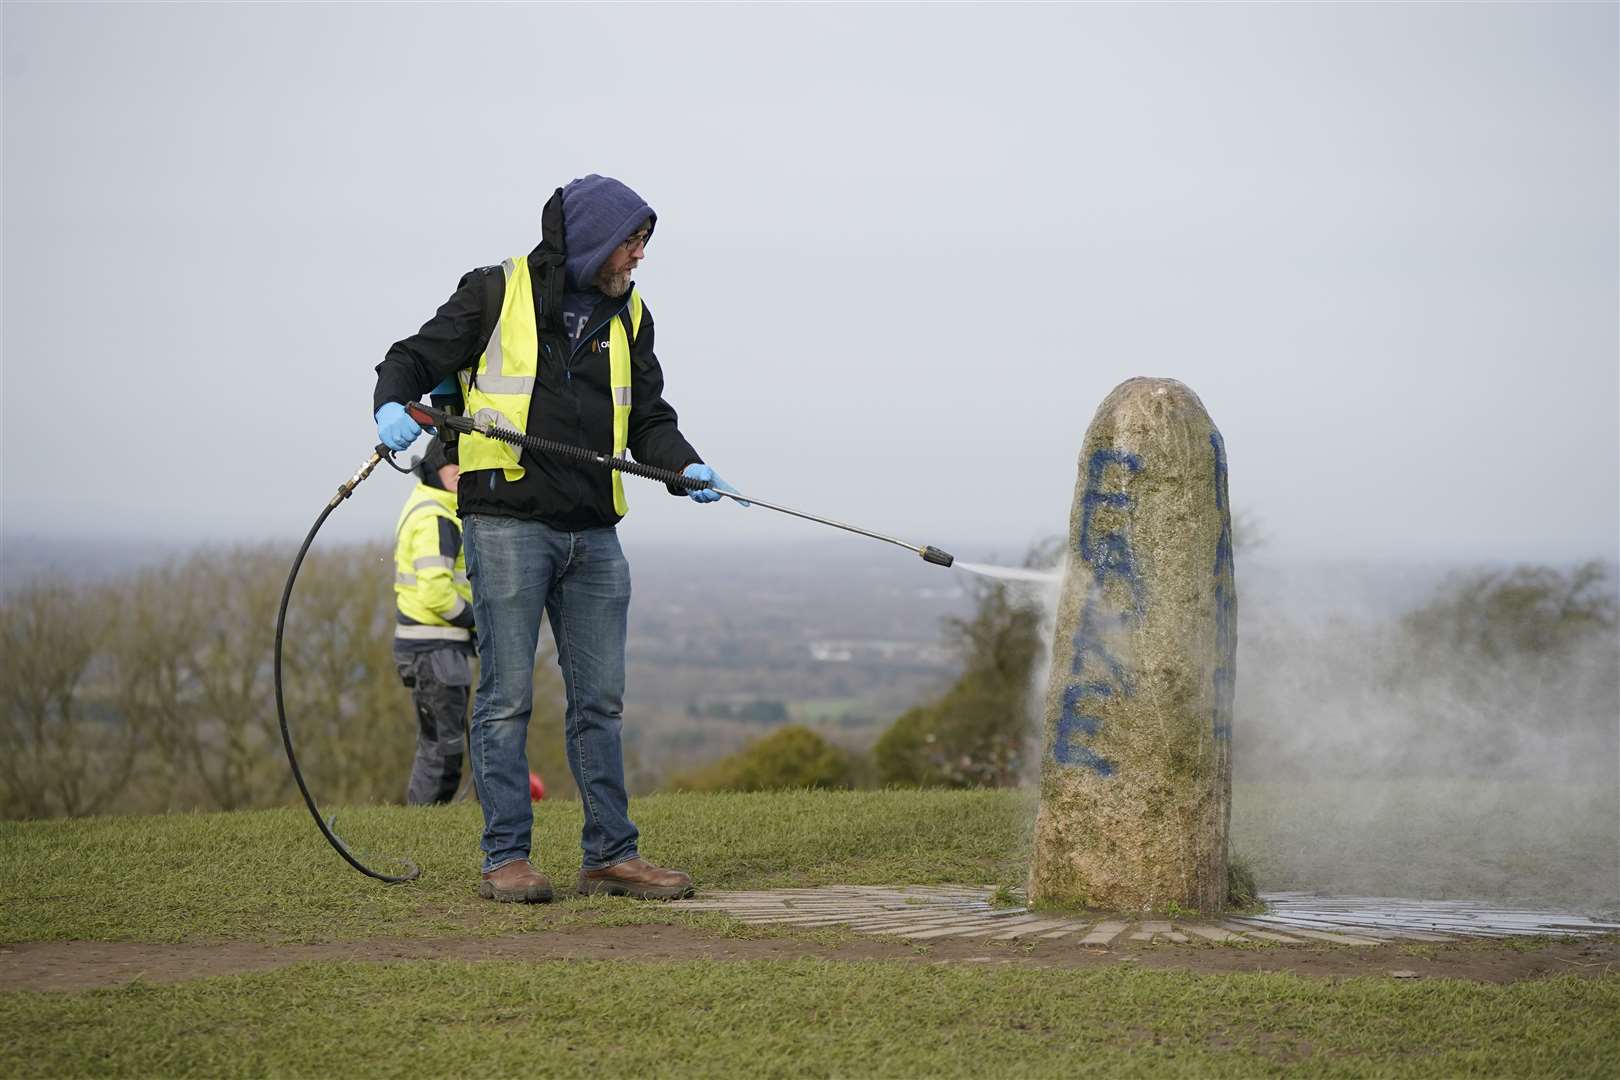 An Office of Public Works worker began the clean-up of graffiti on the Lia Fail standing stone on the Hill of Tara in County Meath after it was vandalised in February (Niall Carson/PA)